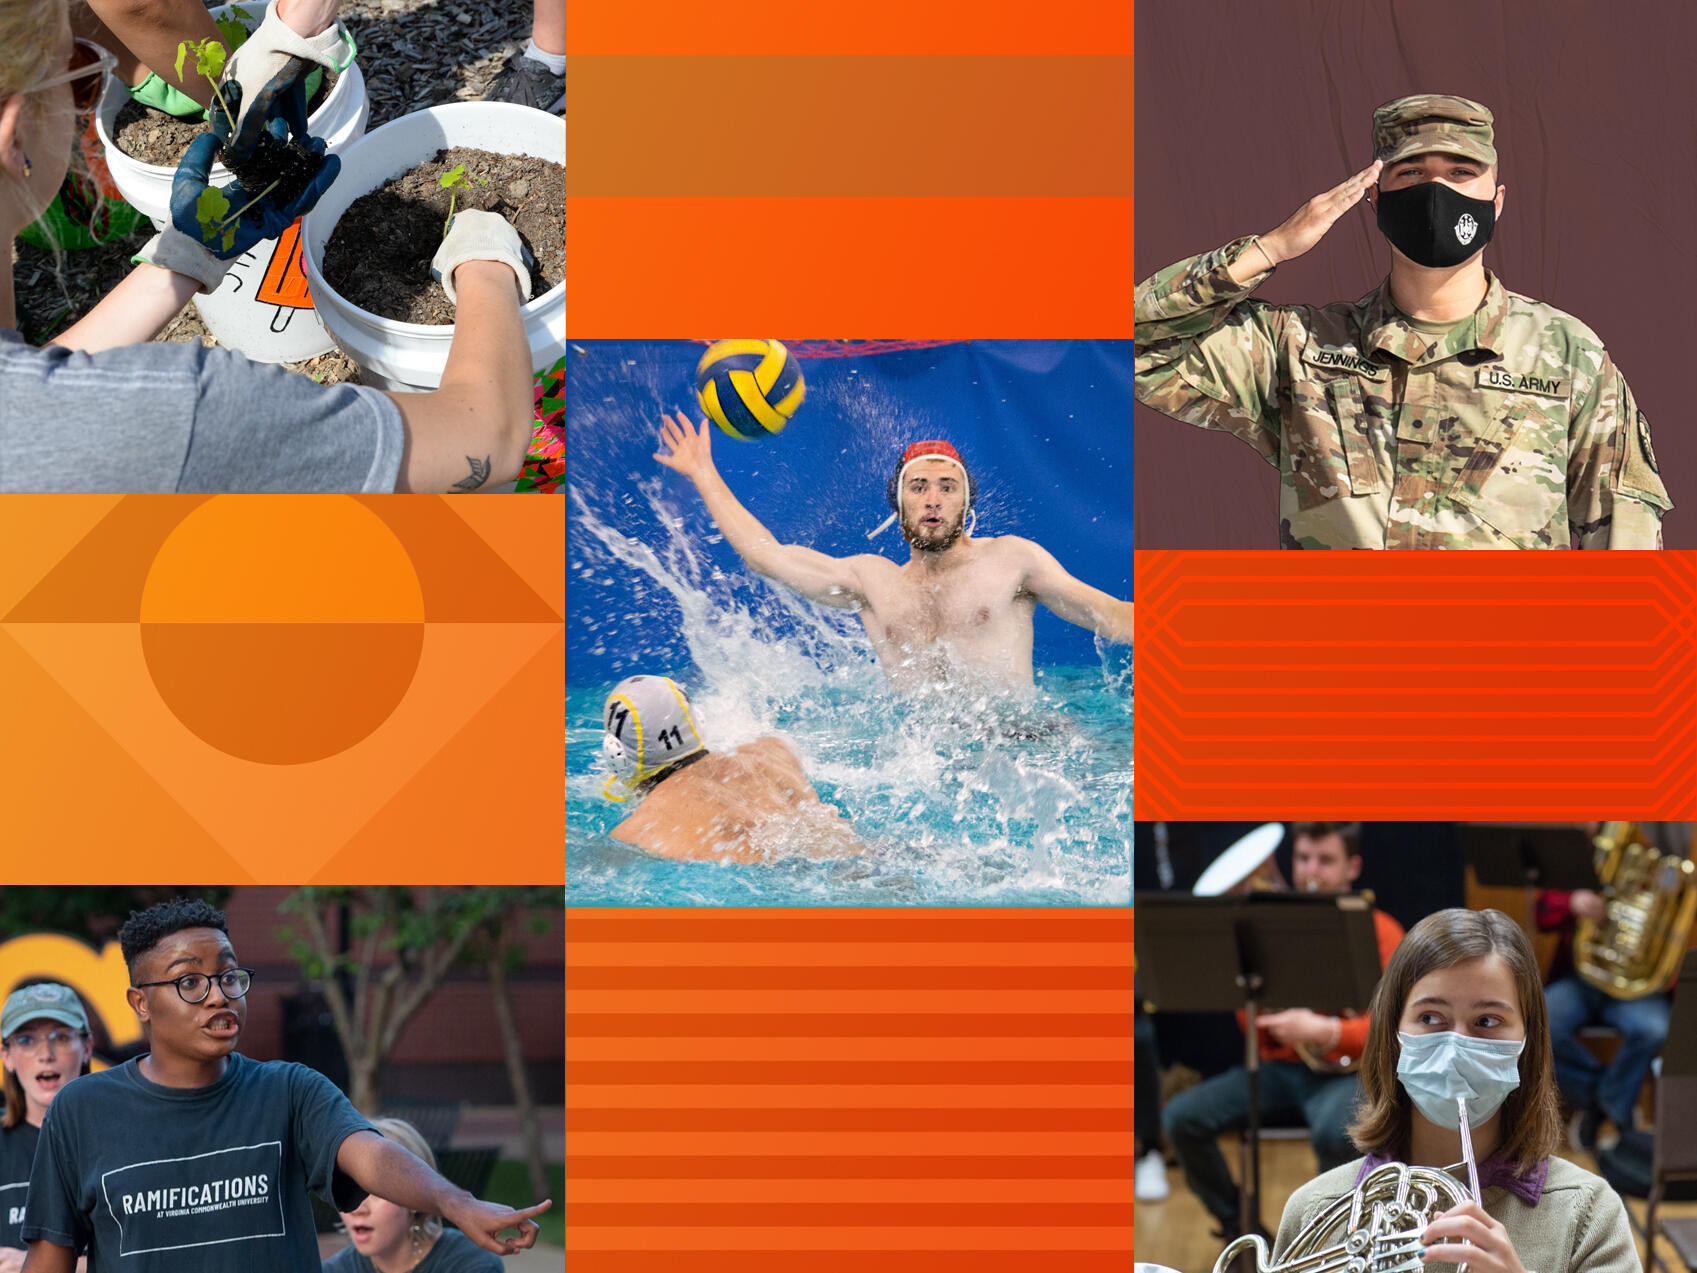 Compilation of photos showing ROTC, music performance, water polo, and gardening.